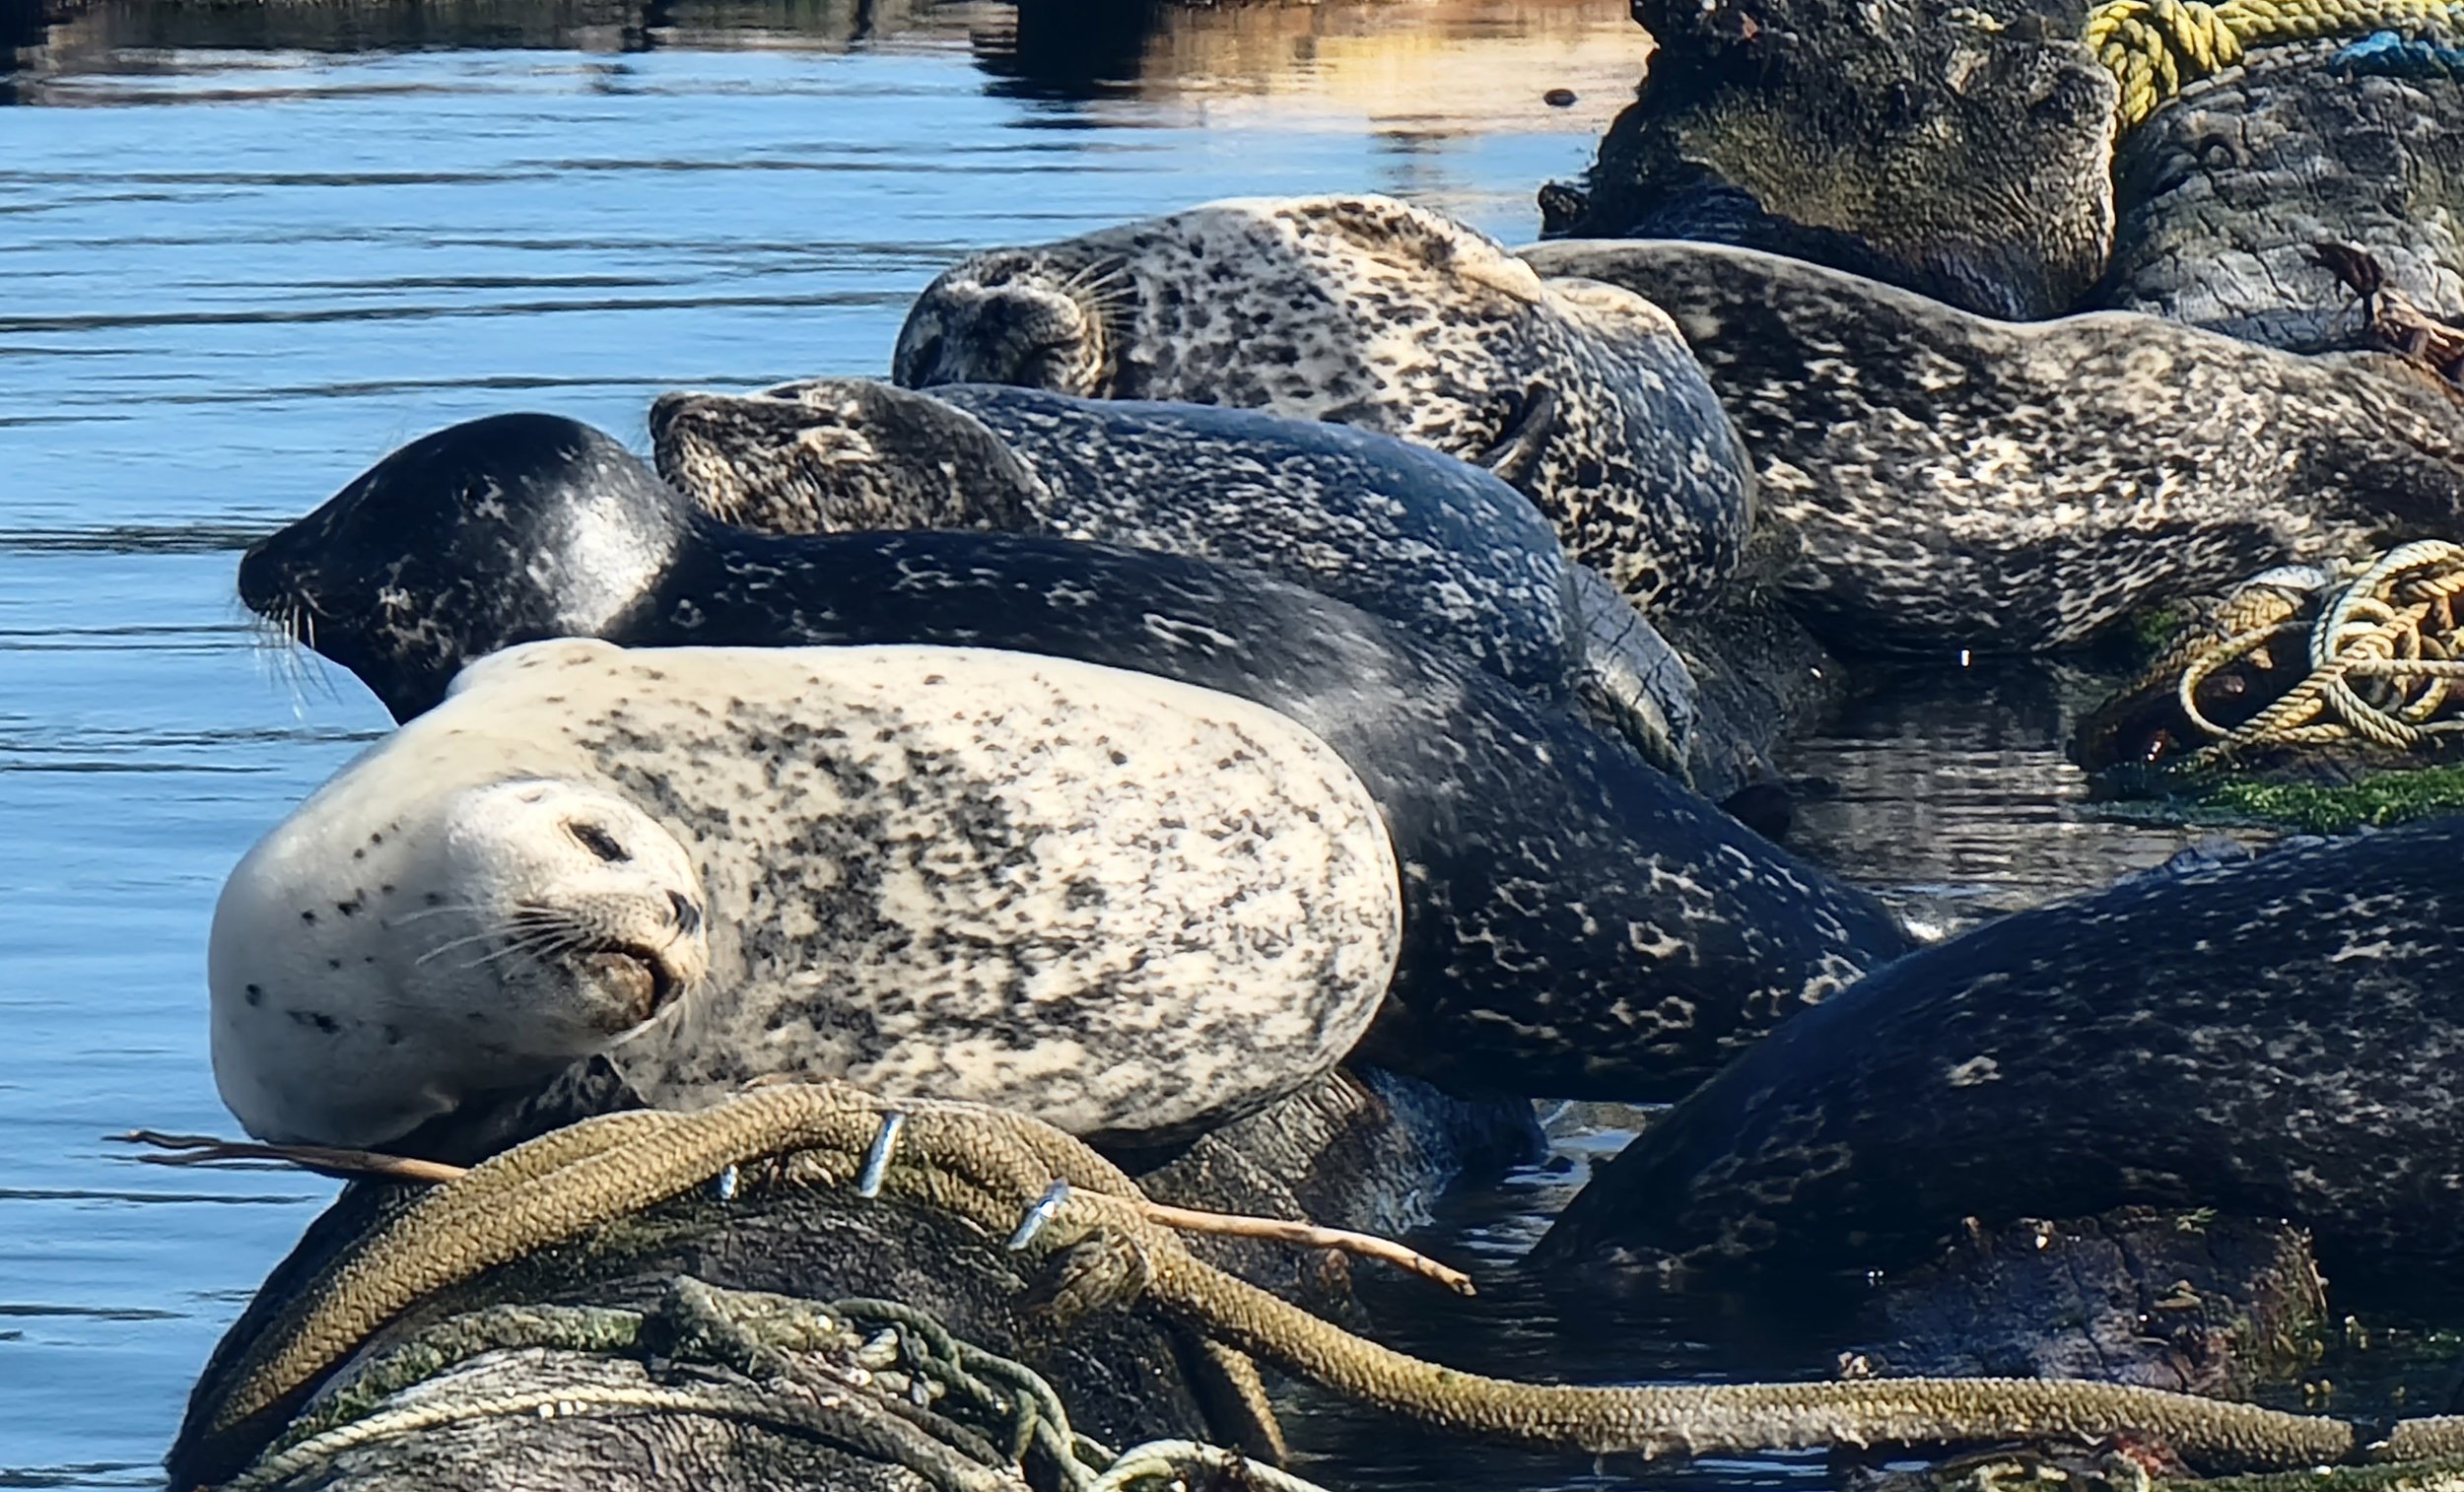 You can often find them just lounging around just 20 feet from the docks.